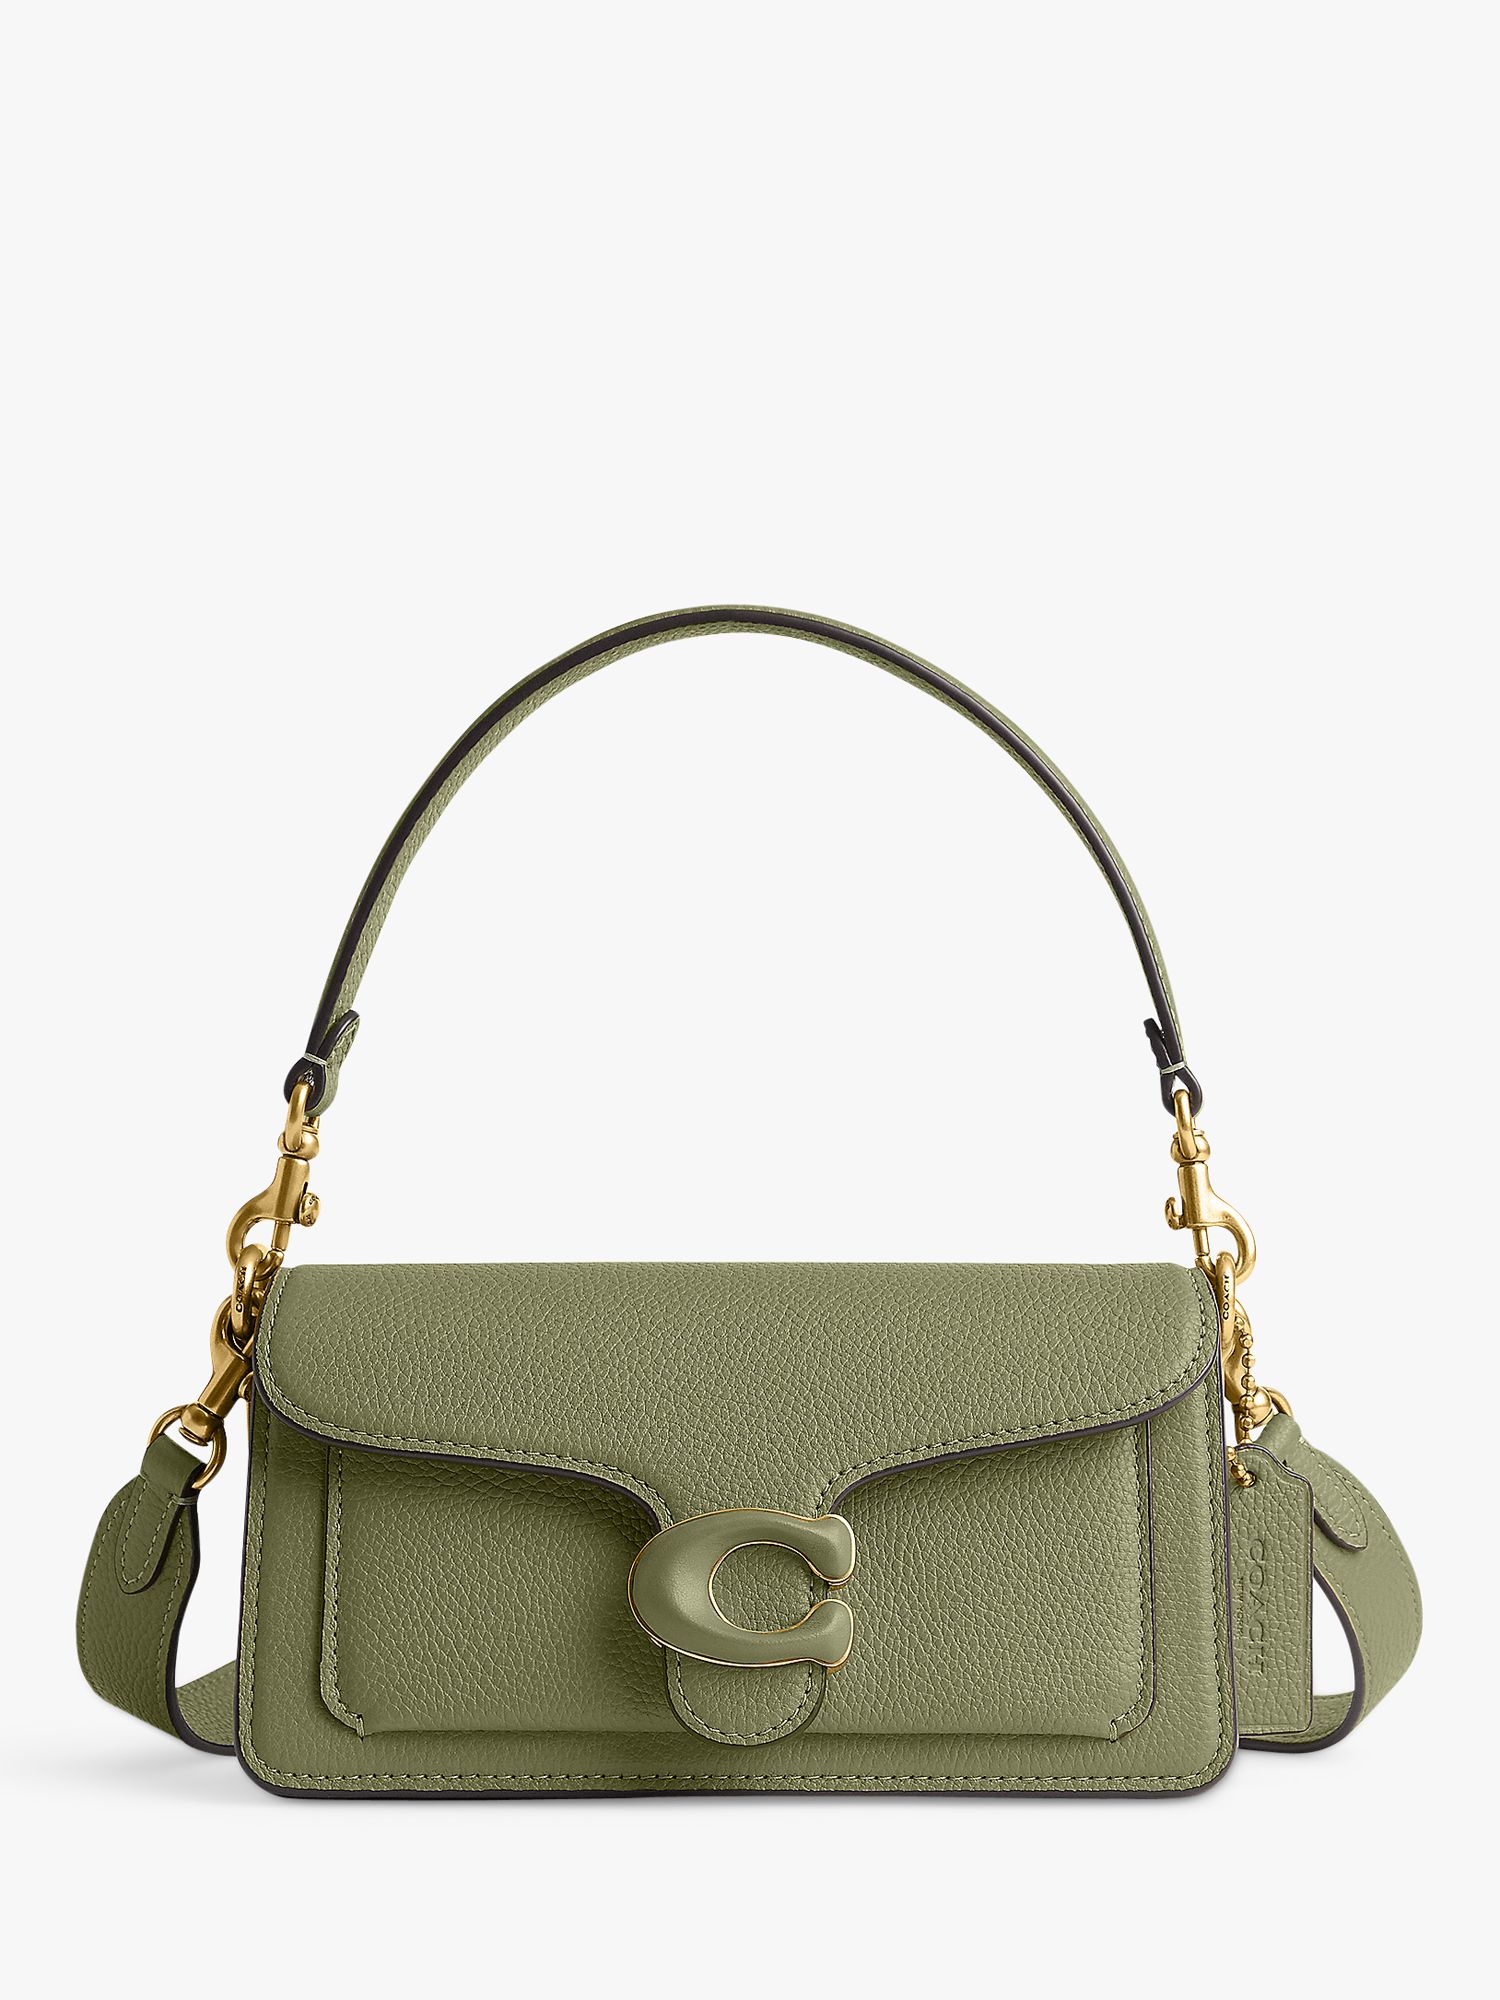 Coach Tabby 20 Leather Shoulder Bag, Moss at John Lewis & Partners